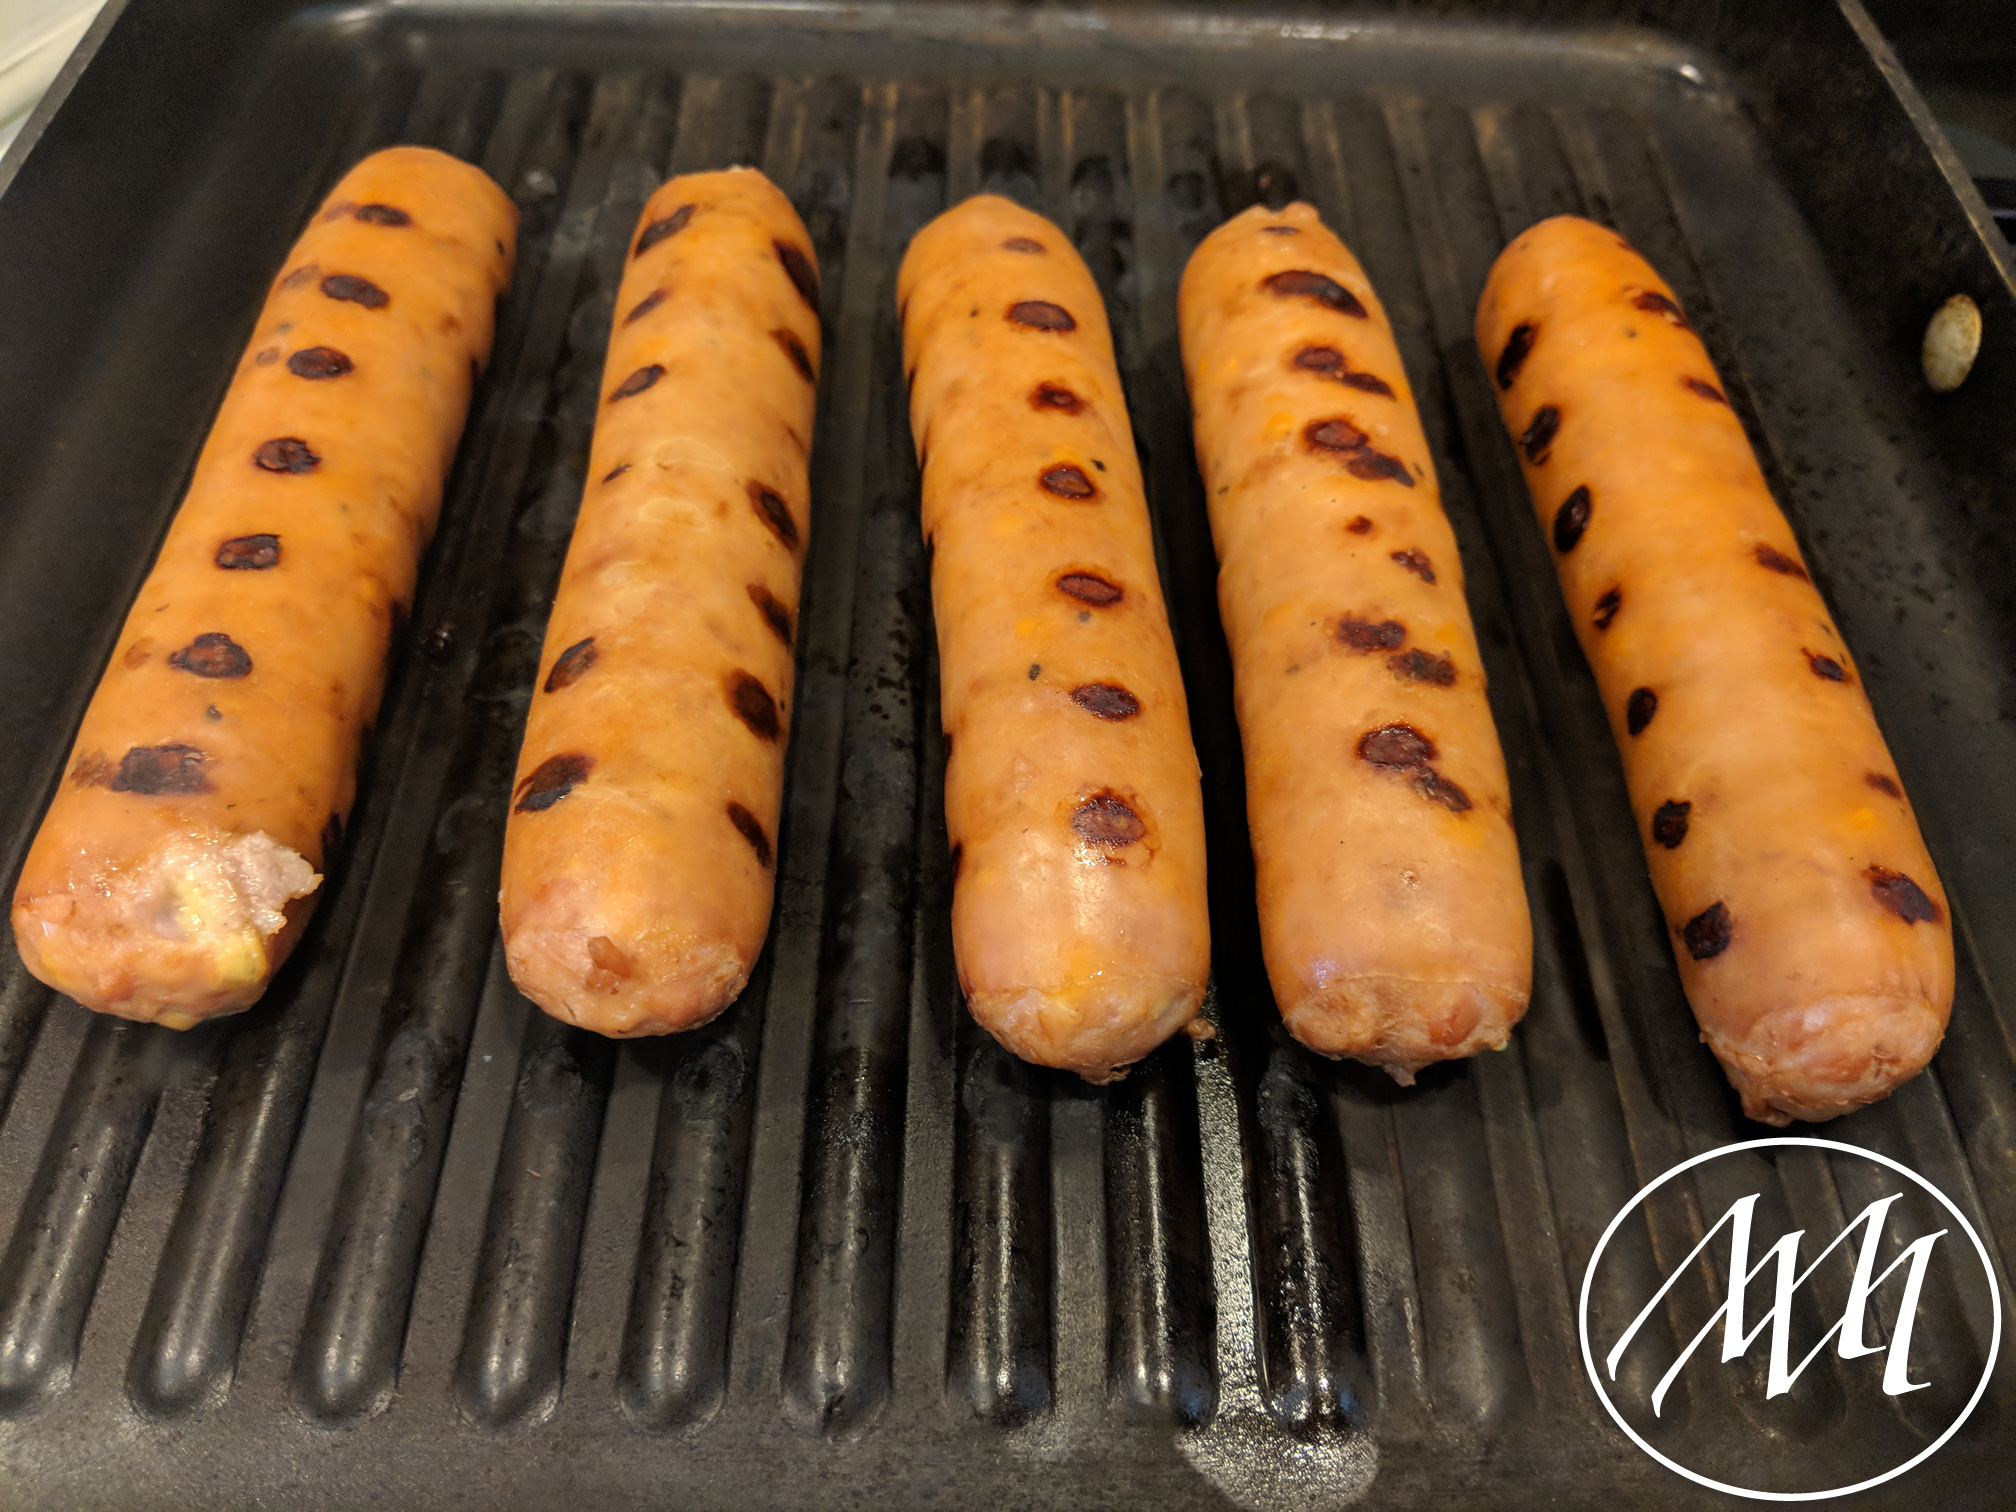 Weiners on Stove Cooking